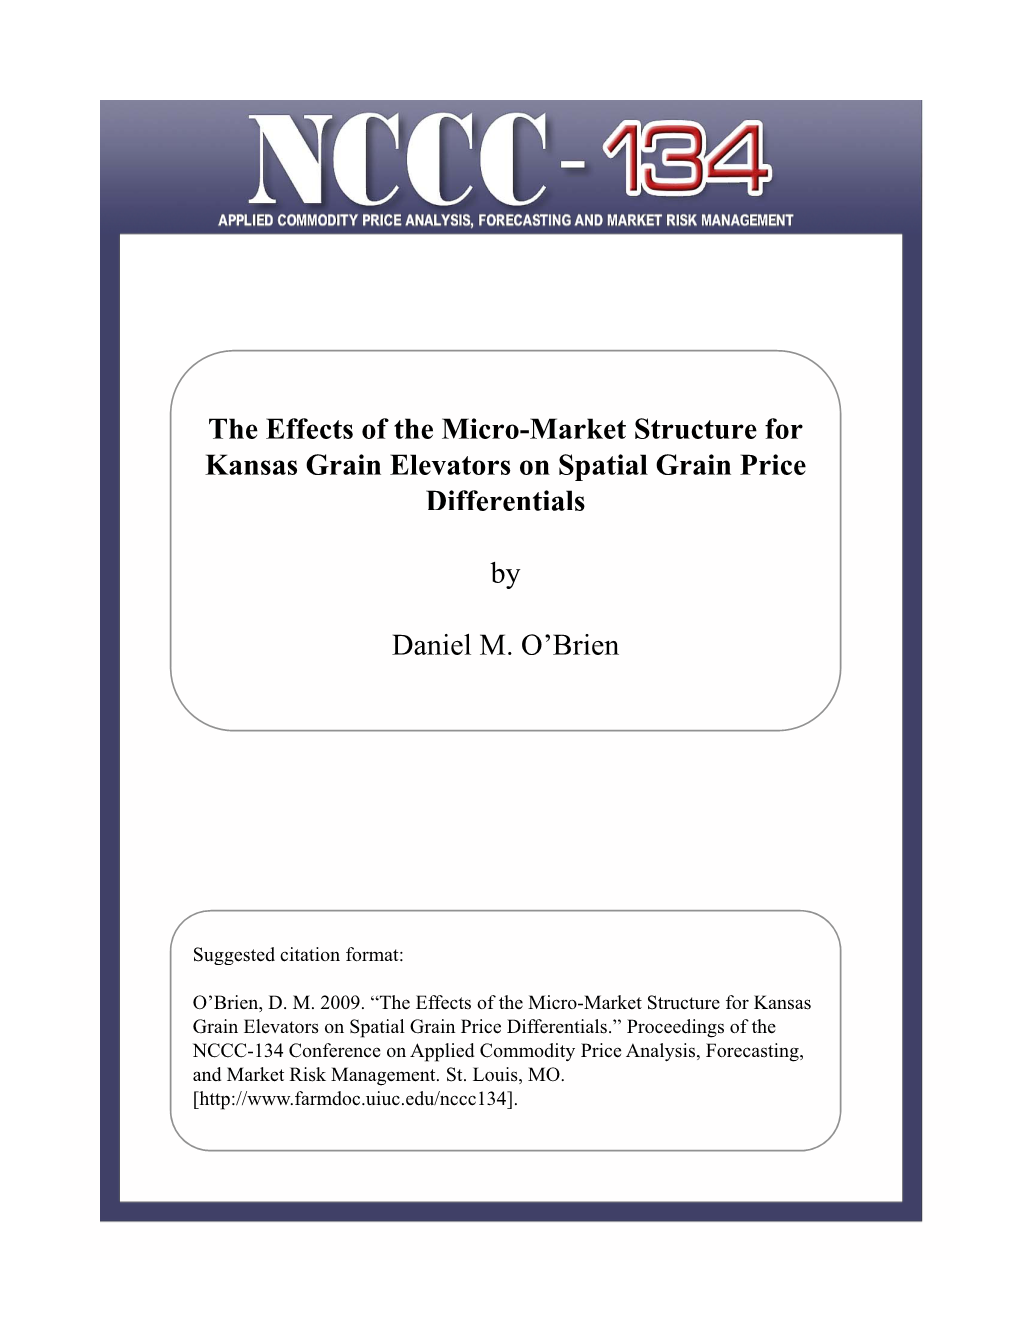 The Effects of the Micro-Market Structure for Kansas Grain Elevators on Spatial Grain Price Diffeeetasrentials